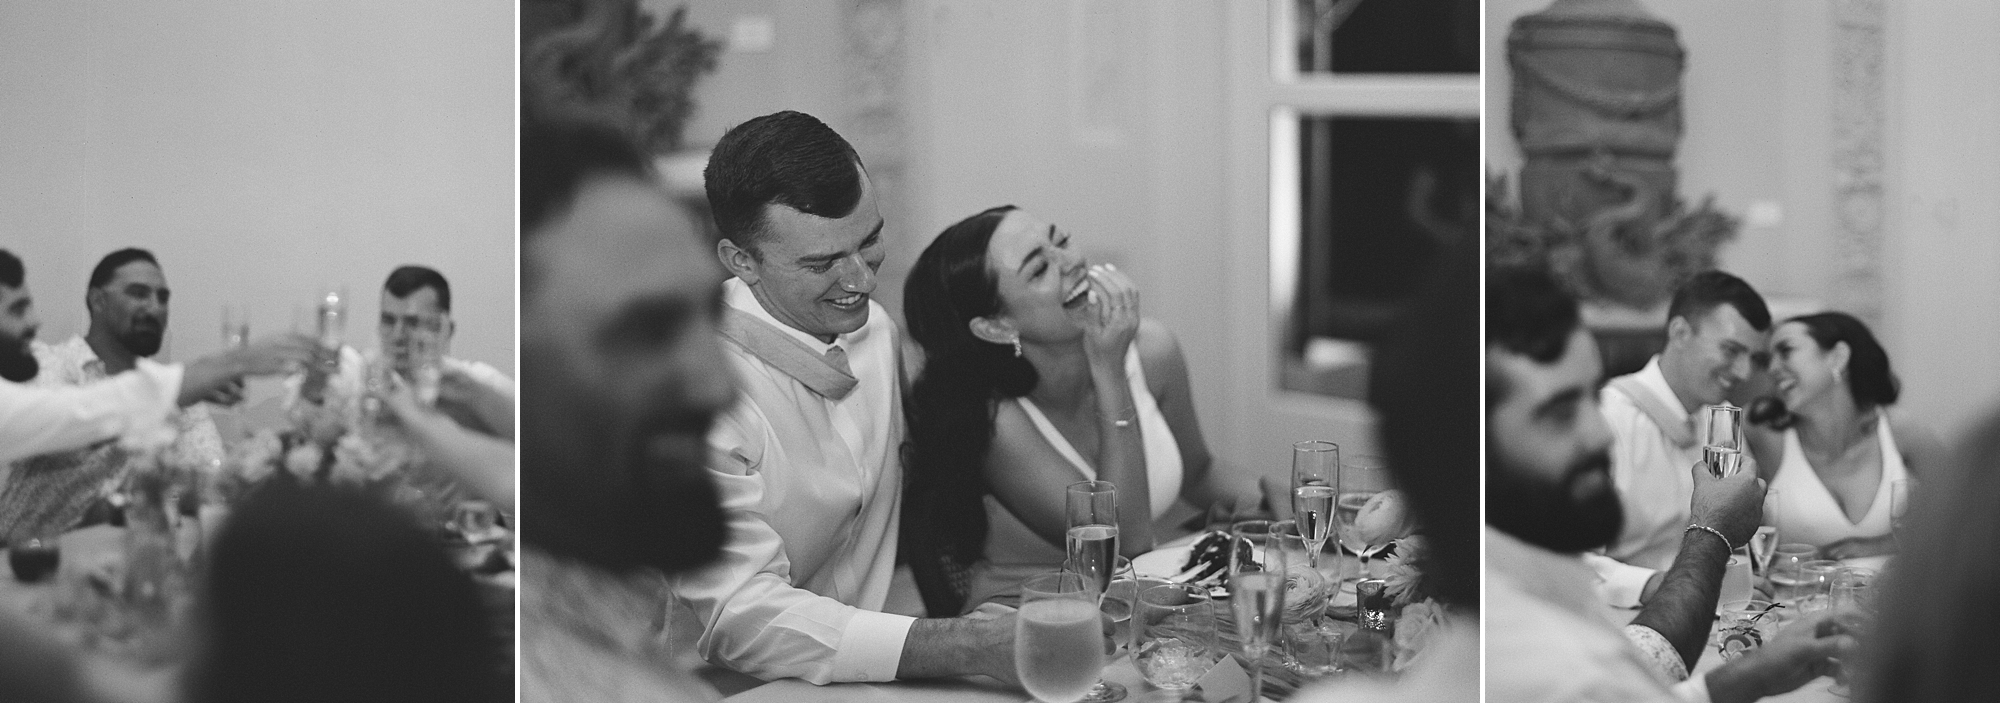 candid wedding portraits at dinner